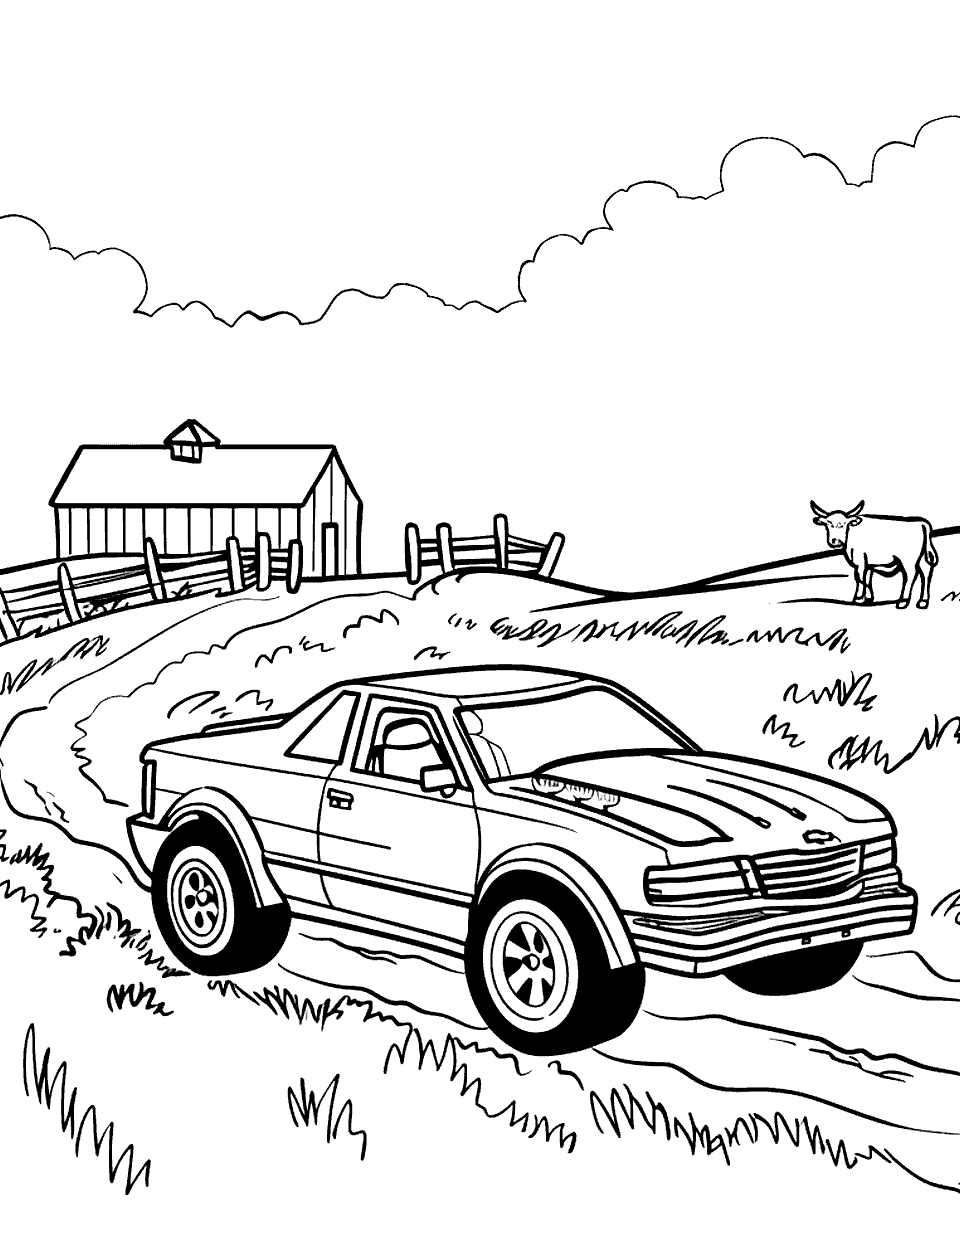 Farmyard Friends Coloring Page - A Hot Wheels car at a farm, with a single cow in the background.